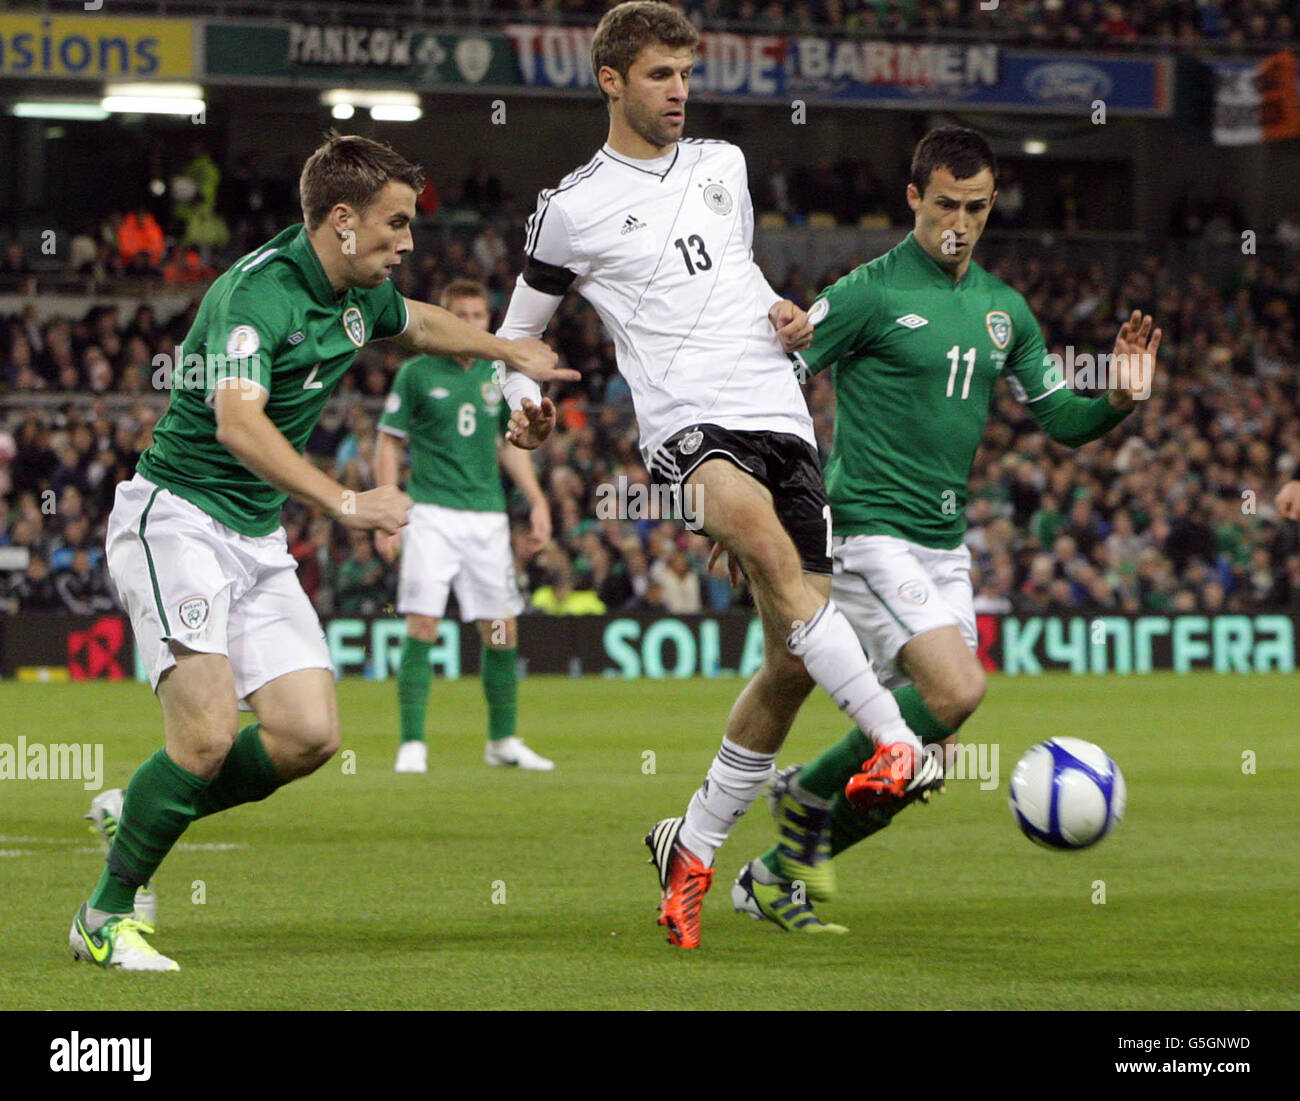 Republic of Ireland's Keith Fahey (right) and Germanys Miroslav Klose in action during the 2014 FIFA World Cup Qualifying match at the Aviva Stadium, Dublin, Ireland. Stock Photo